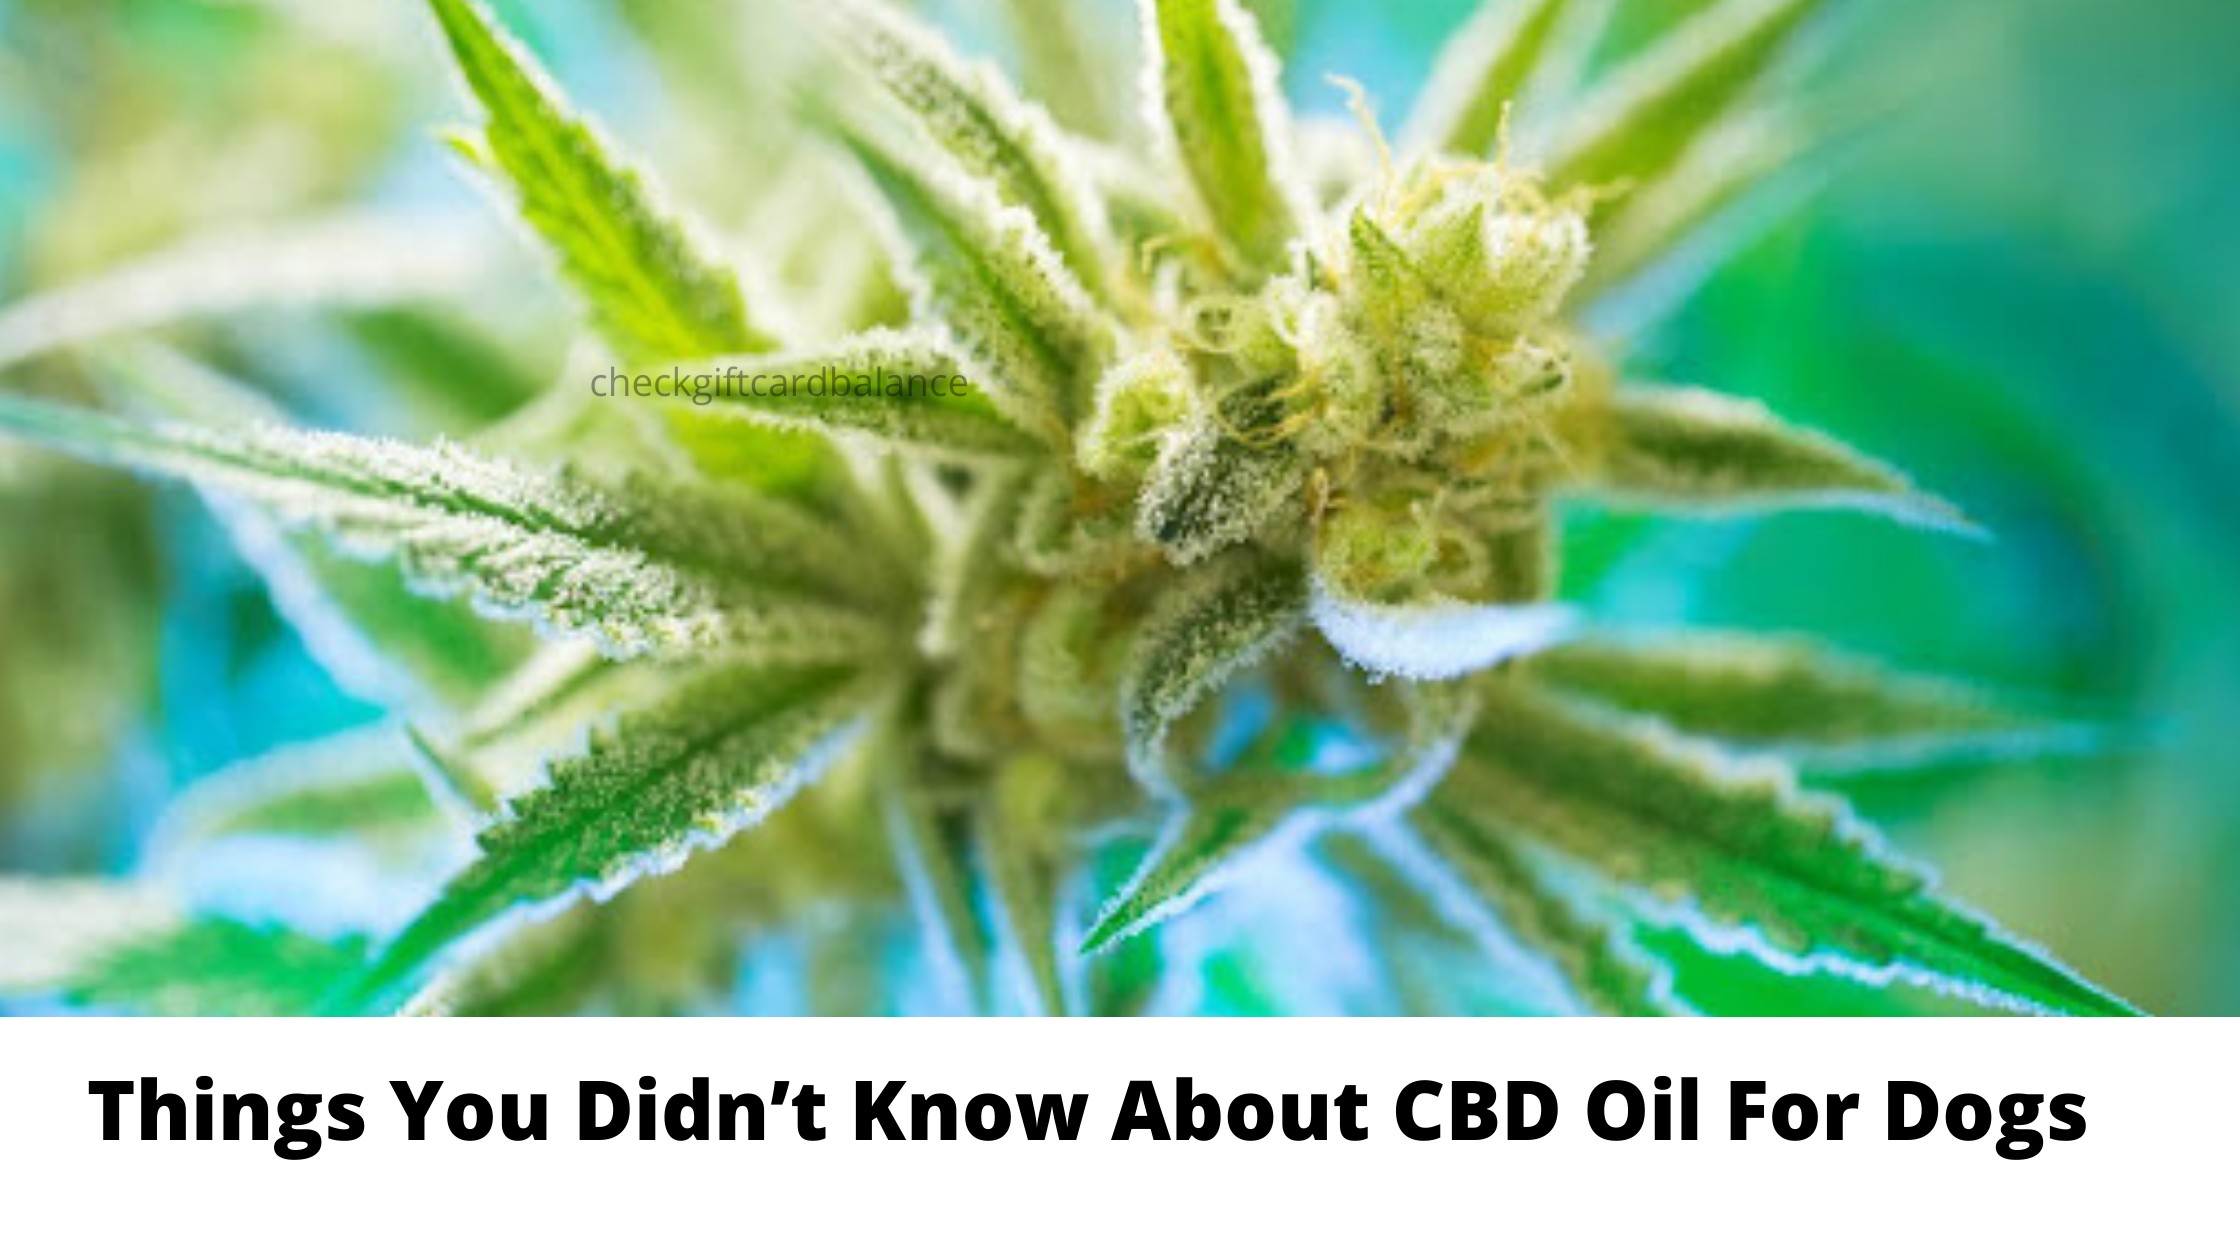 Things You Didn’t Know About CBD Oil For Dogs